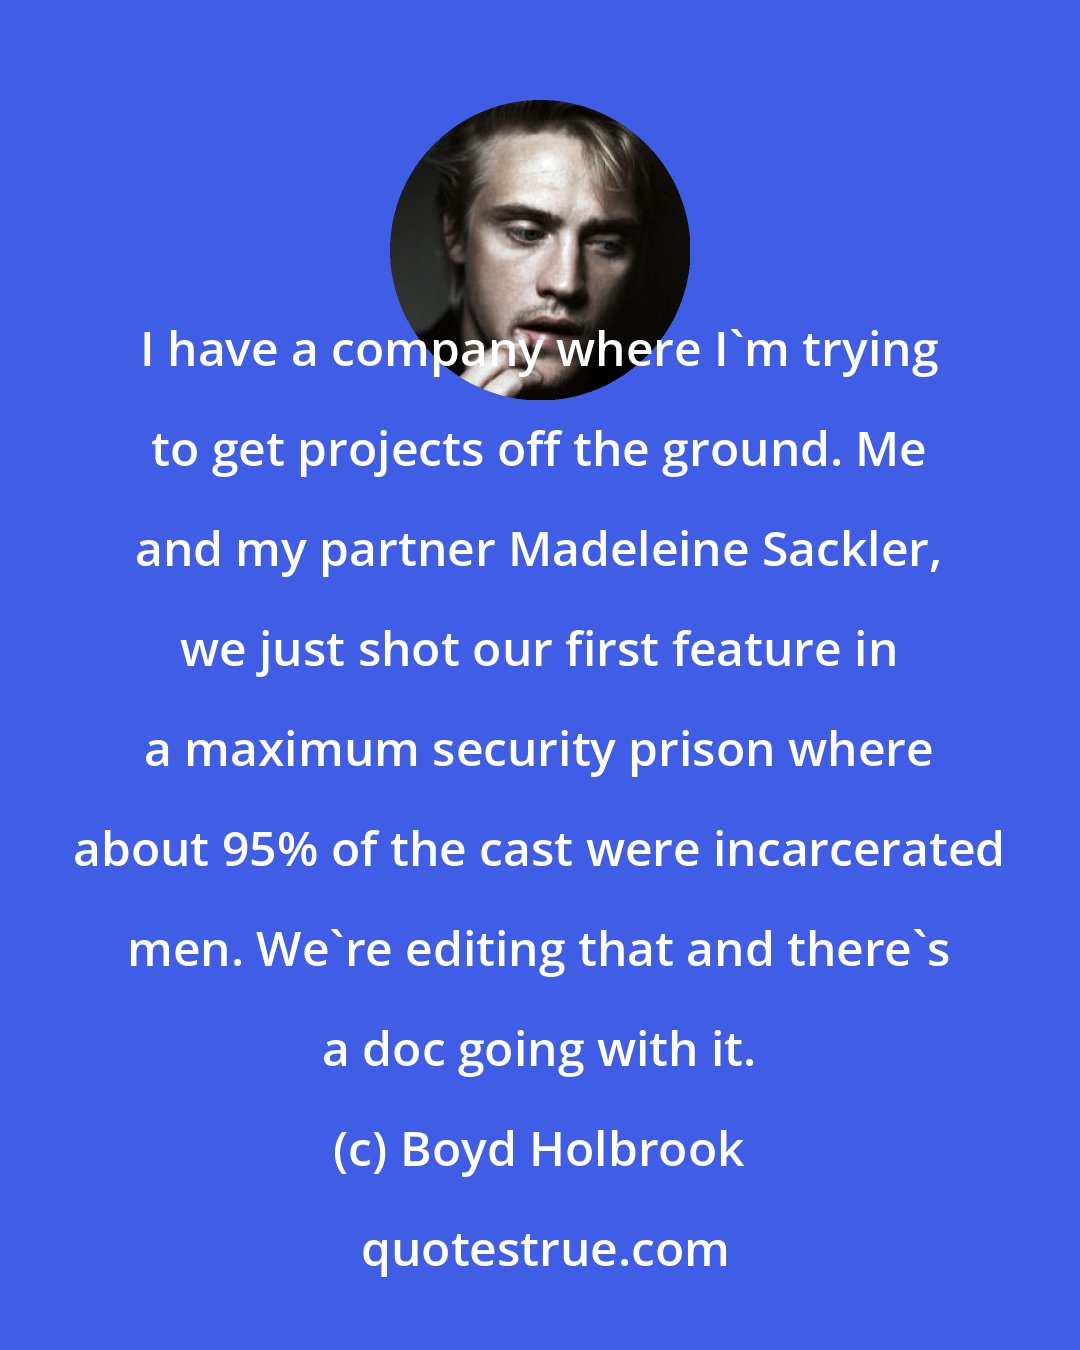 Boyd Holbrook: I have a company where I'm trying to get projects off the ground. Me and my partner Madeleine Sackler, we just shot our first feature in a maximum security prison where about 95% of the cast were incarcerated men. We're editing that and there's a doc going with it.